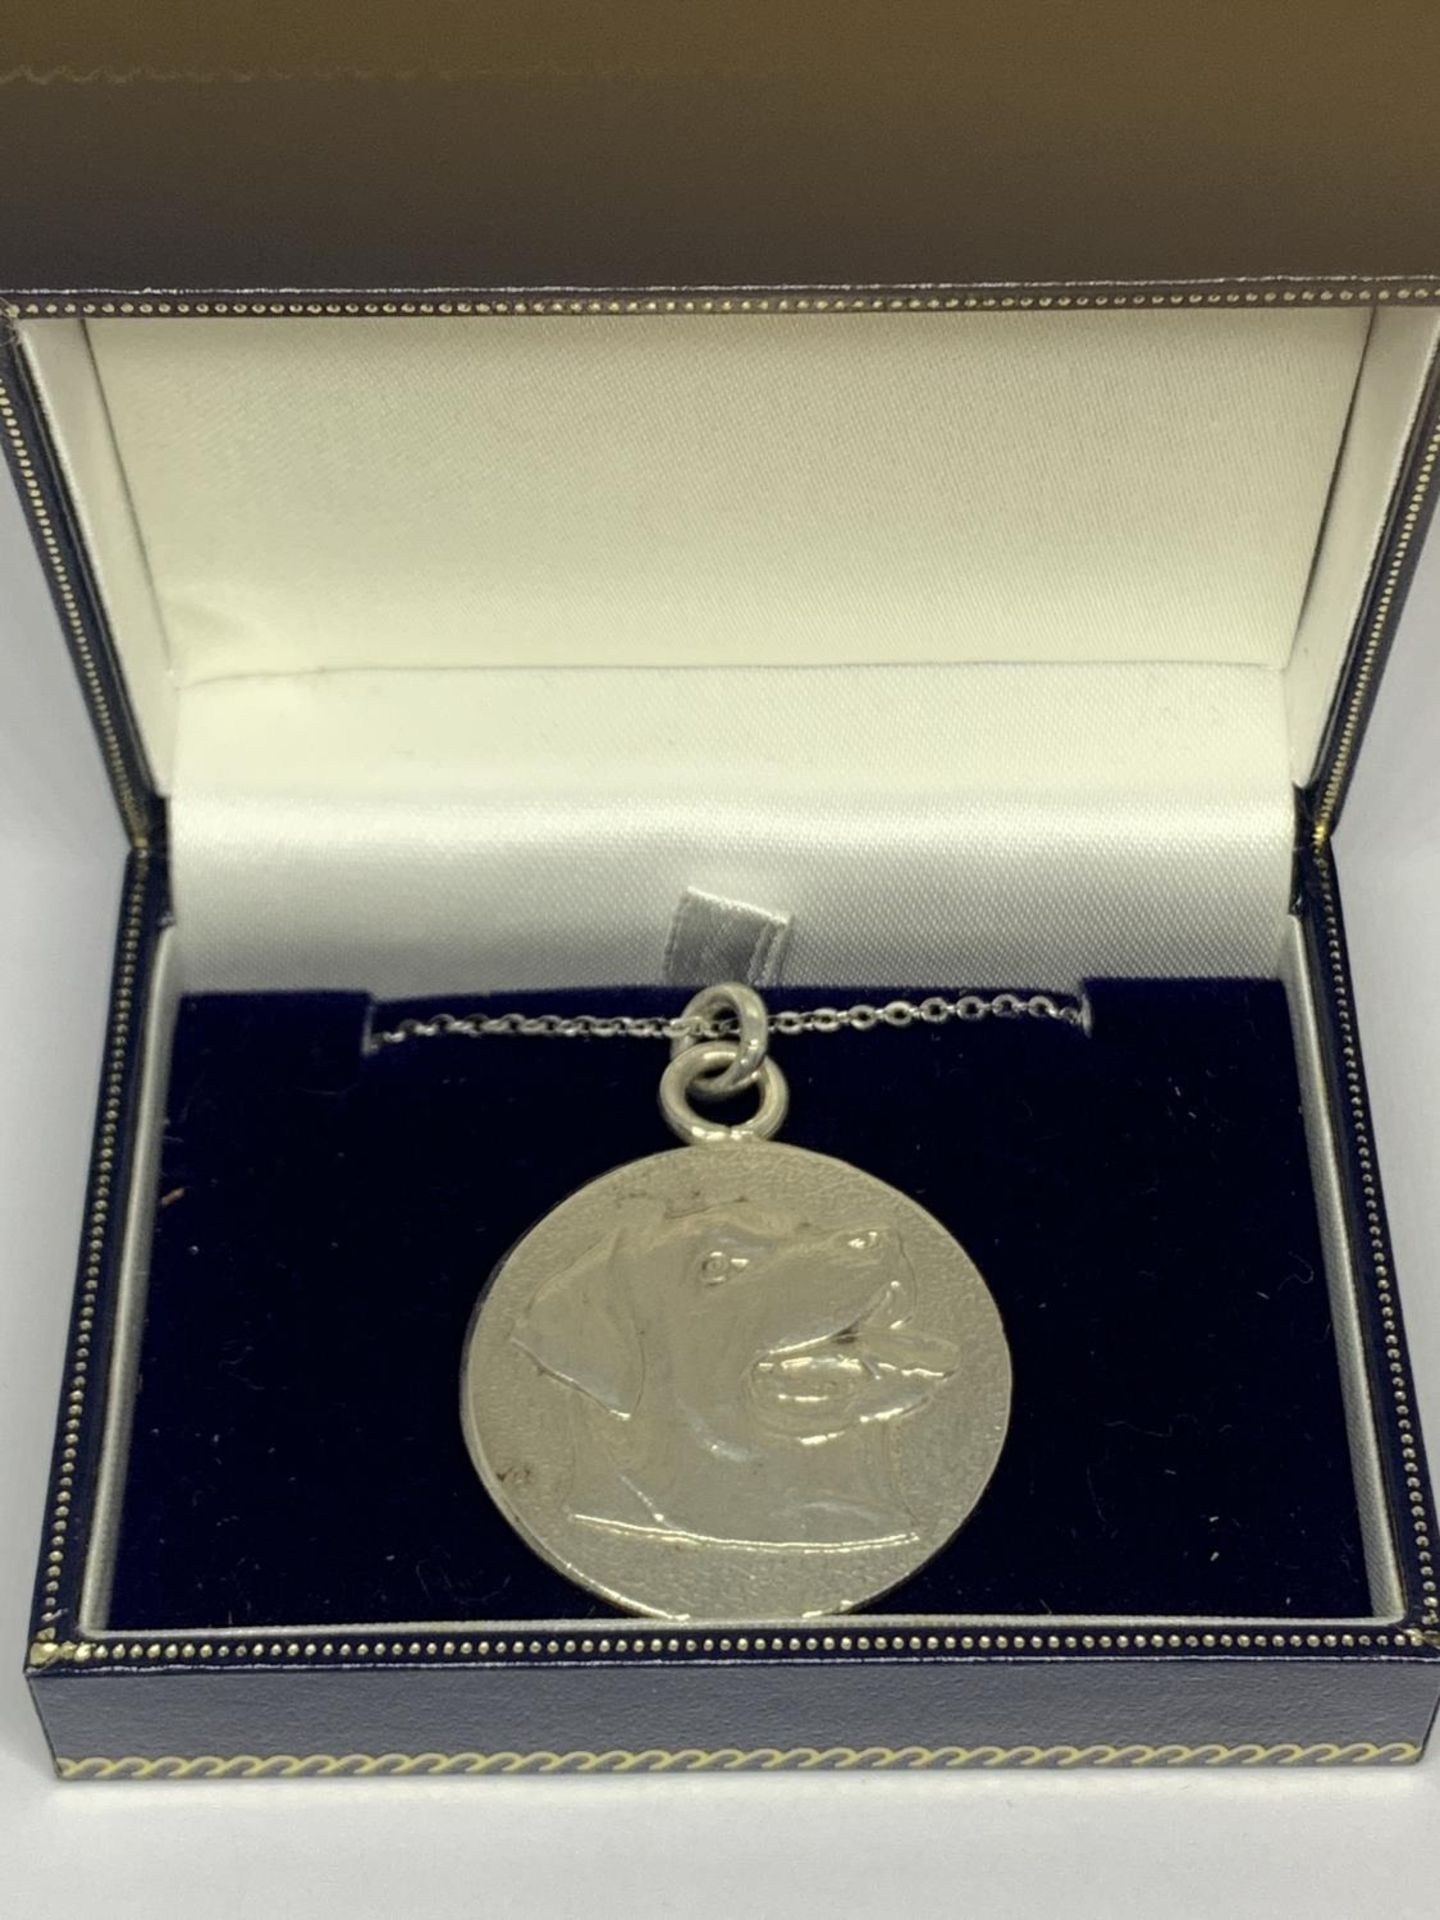 A SILVER ROTWEILLER PENDANT AND CHAIN IN A PRESENTATION BOX